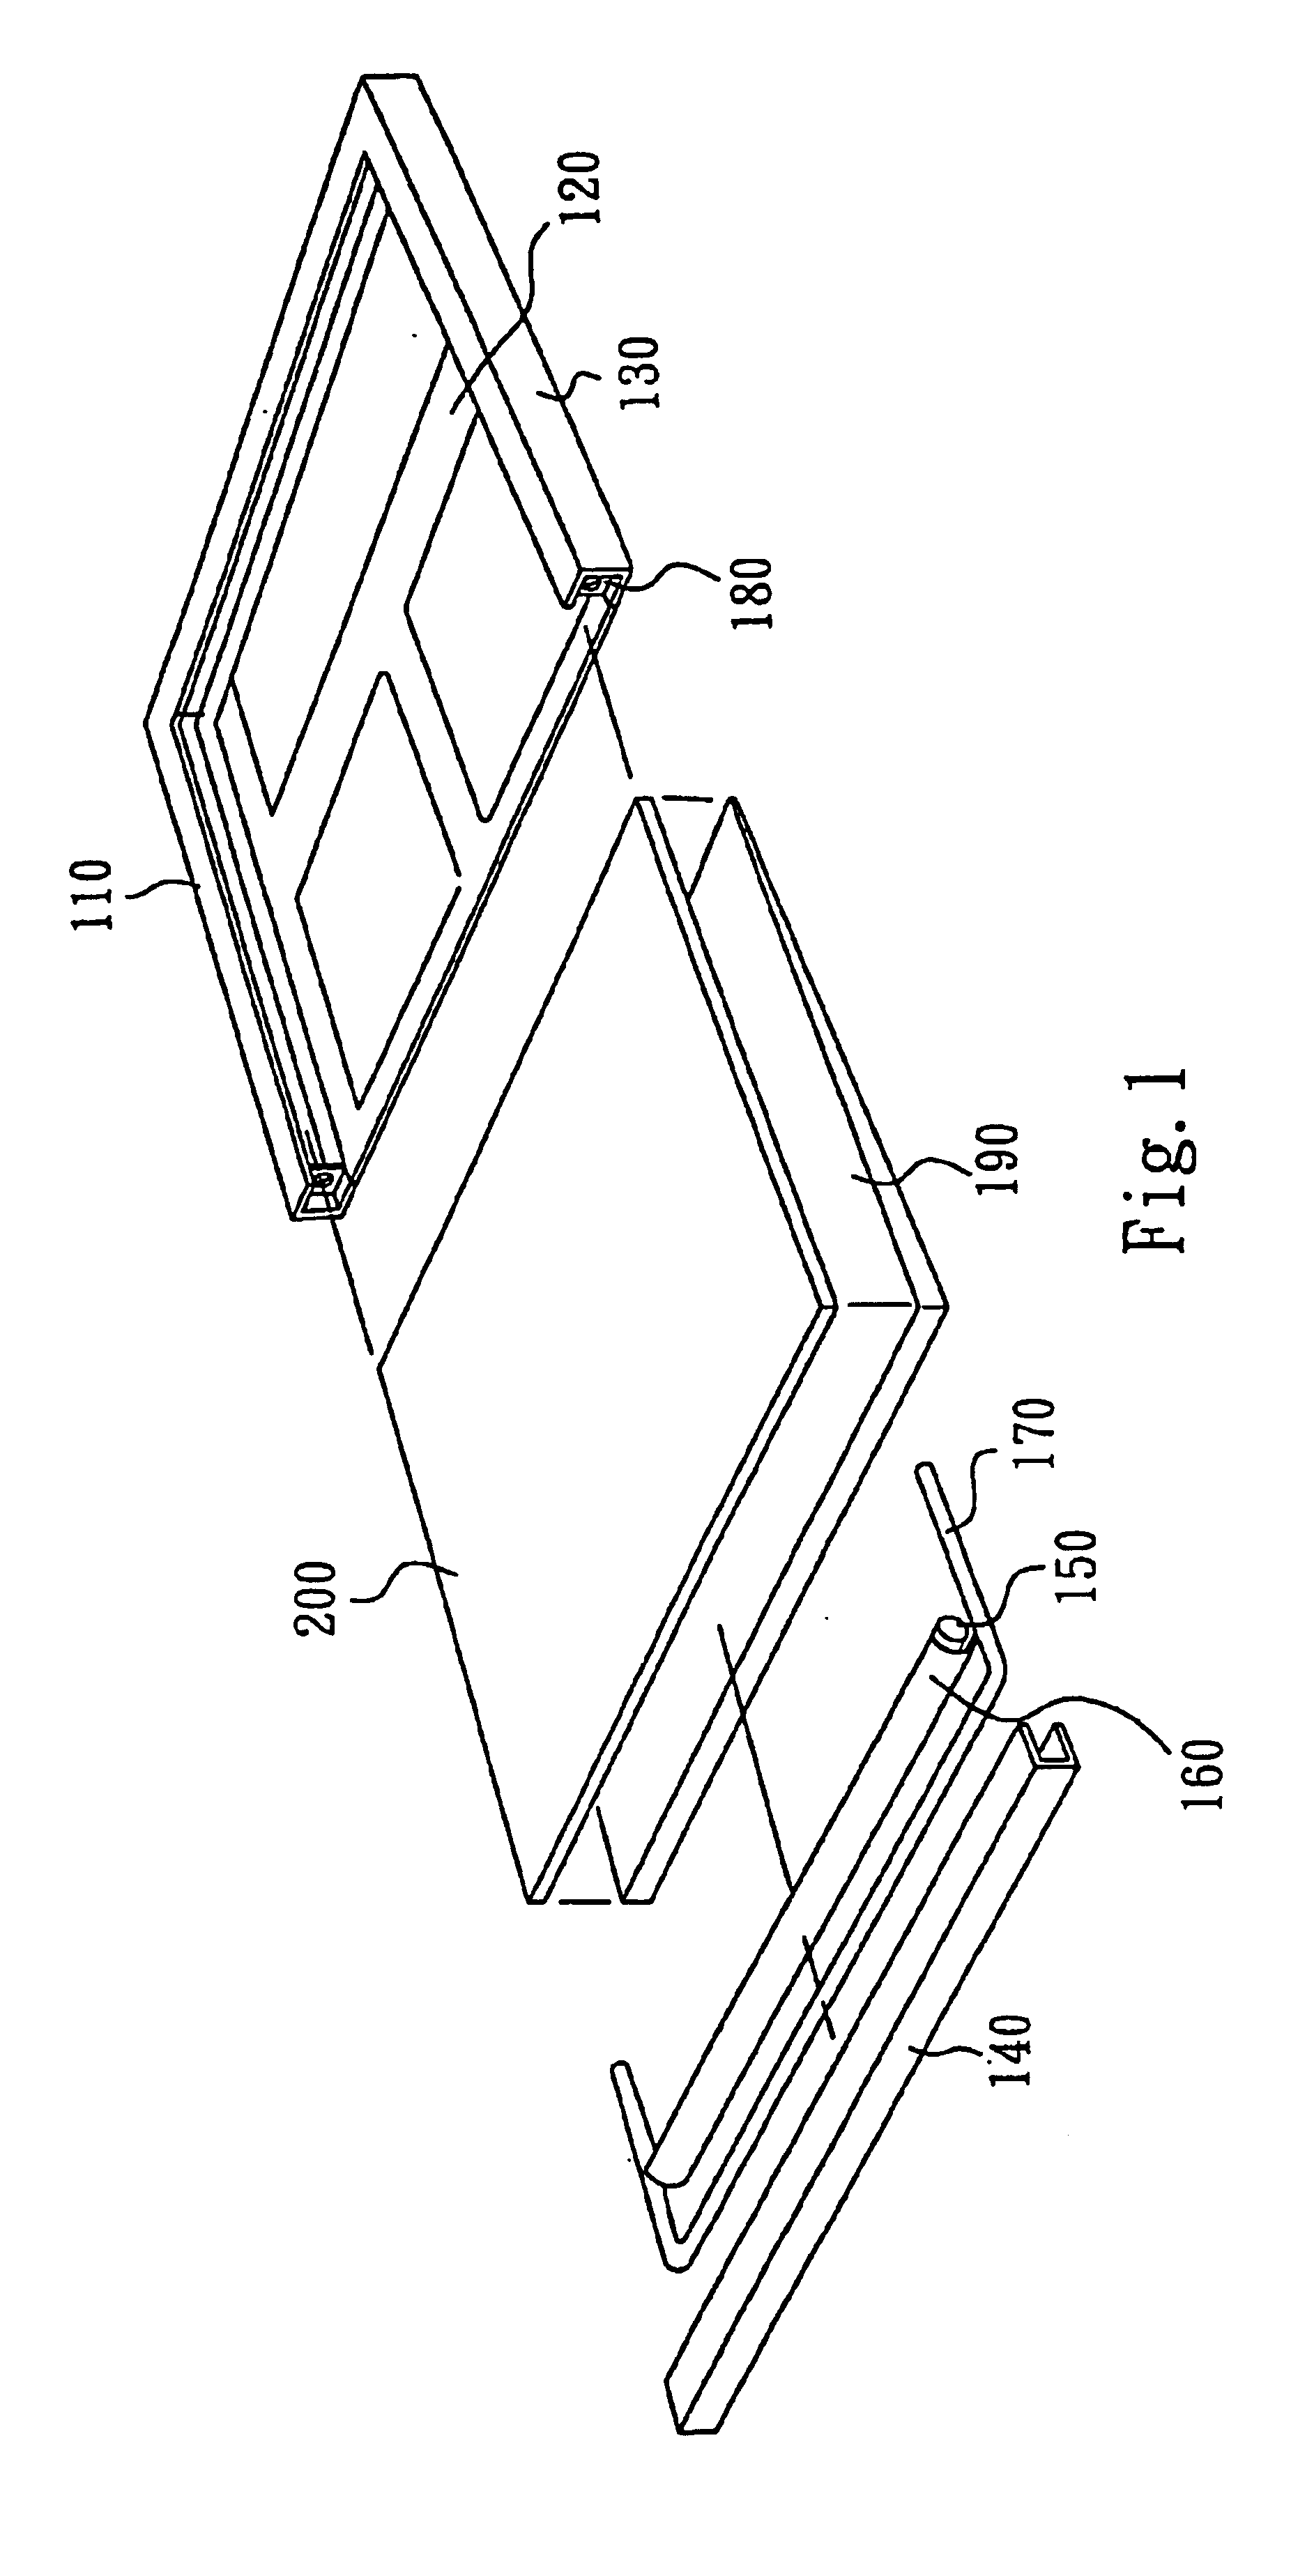 Backlight module for homogenizing the temperature of a flat panel display device